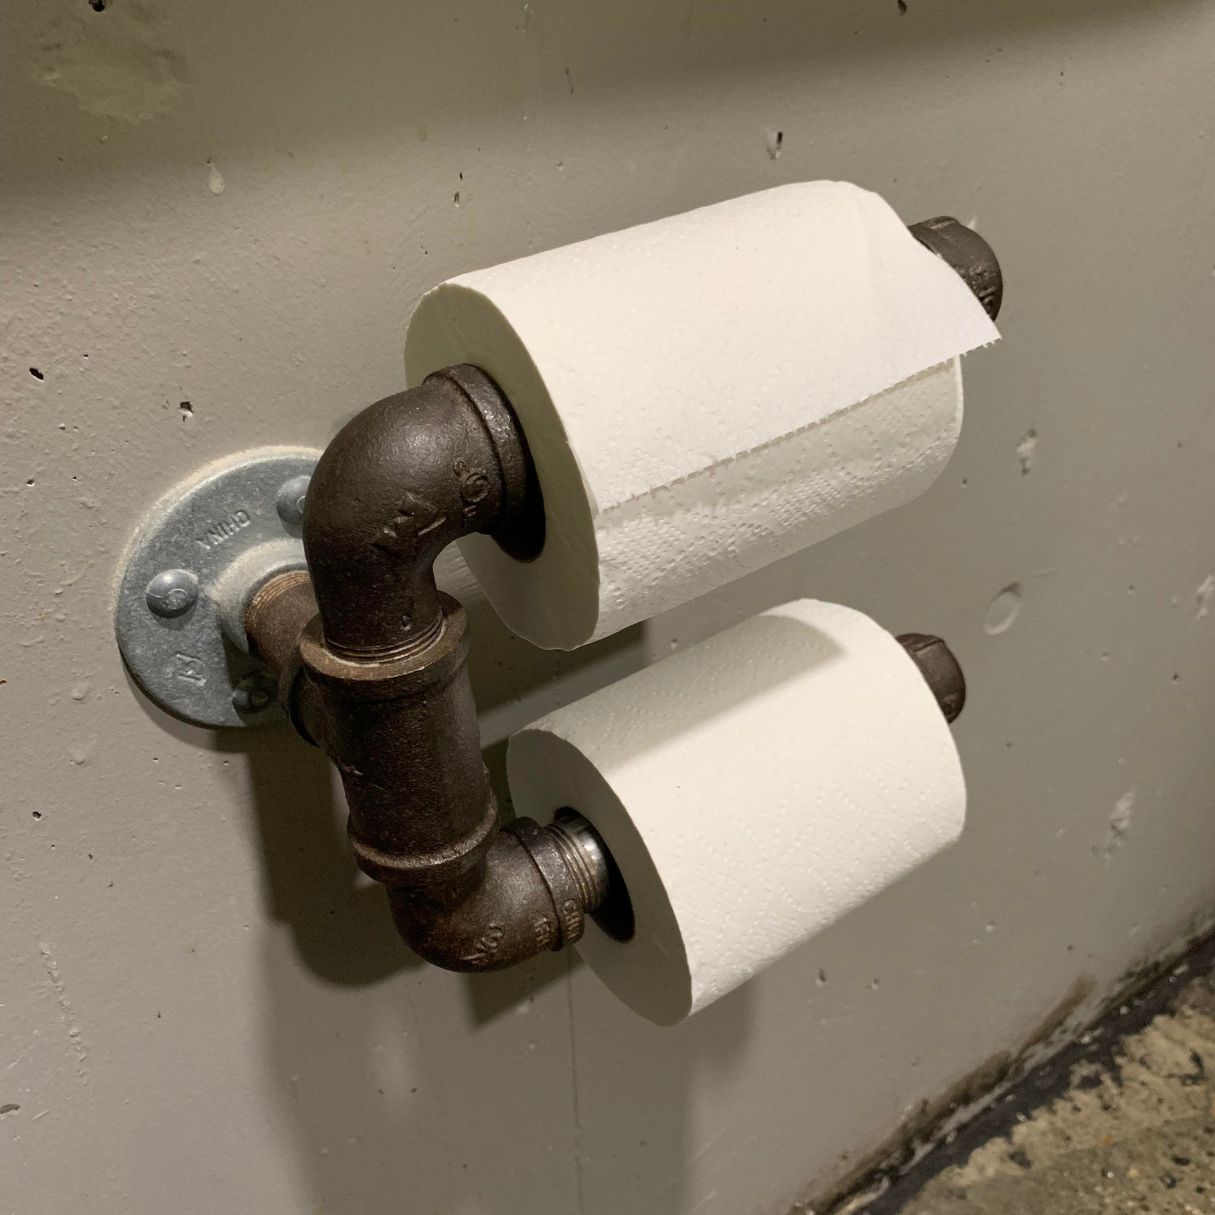 How to Change Toilet Paper Roll in Public Restroom: Expert tips for a hassle-free experience